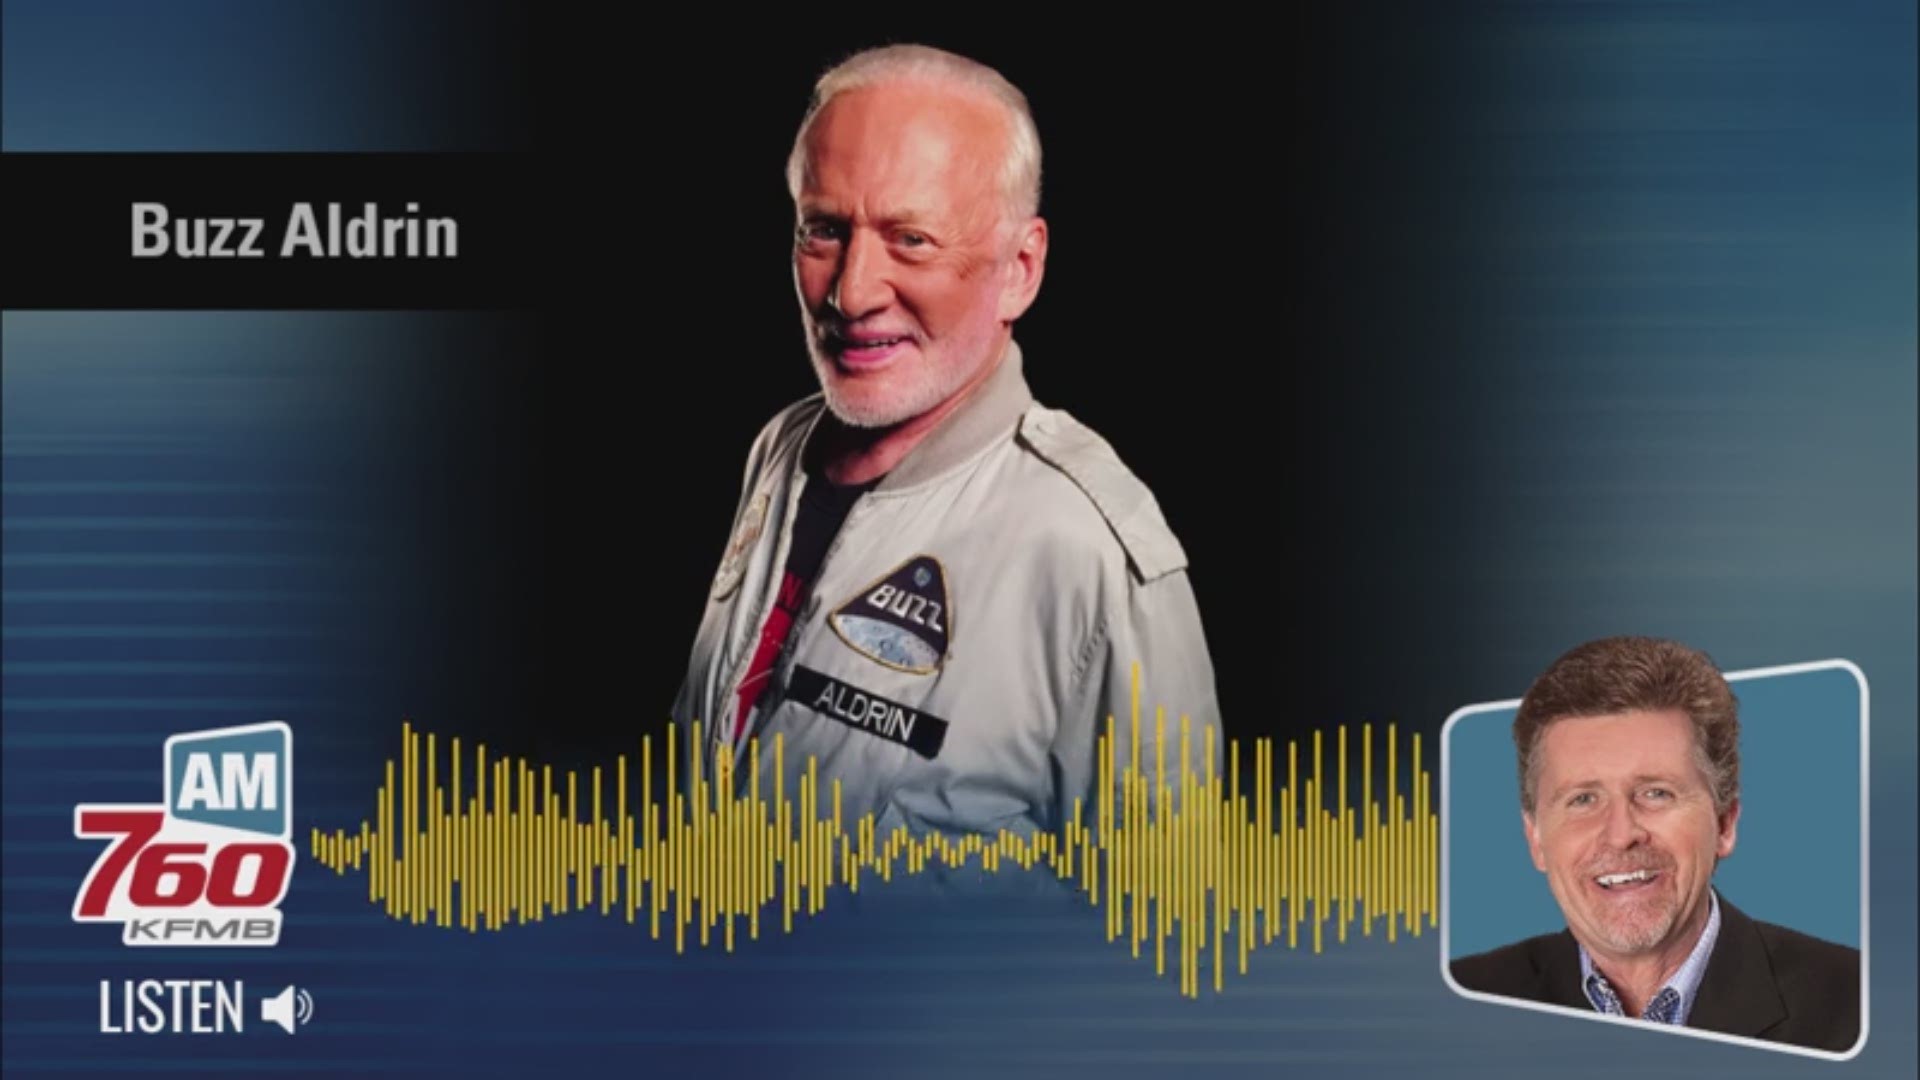 AM 760’s Mark Larson spoke with icon and legendary astronaut Buzz Aldrin about the 50th anniversary, his meeting with President Trump and VP Pence in discussing future missions with the National Space Council, and how politics driving people apart in this country will be the downfall of mankind.